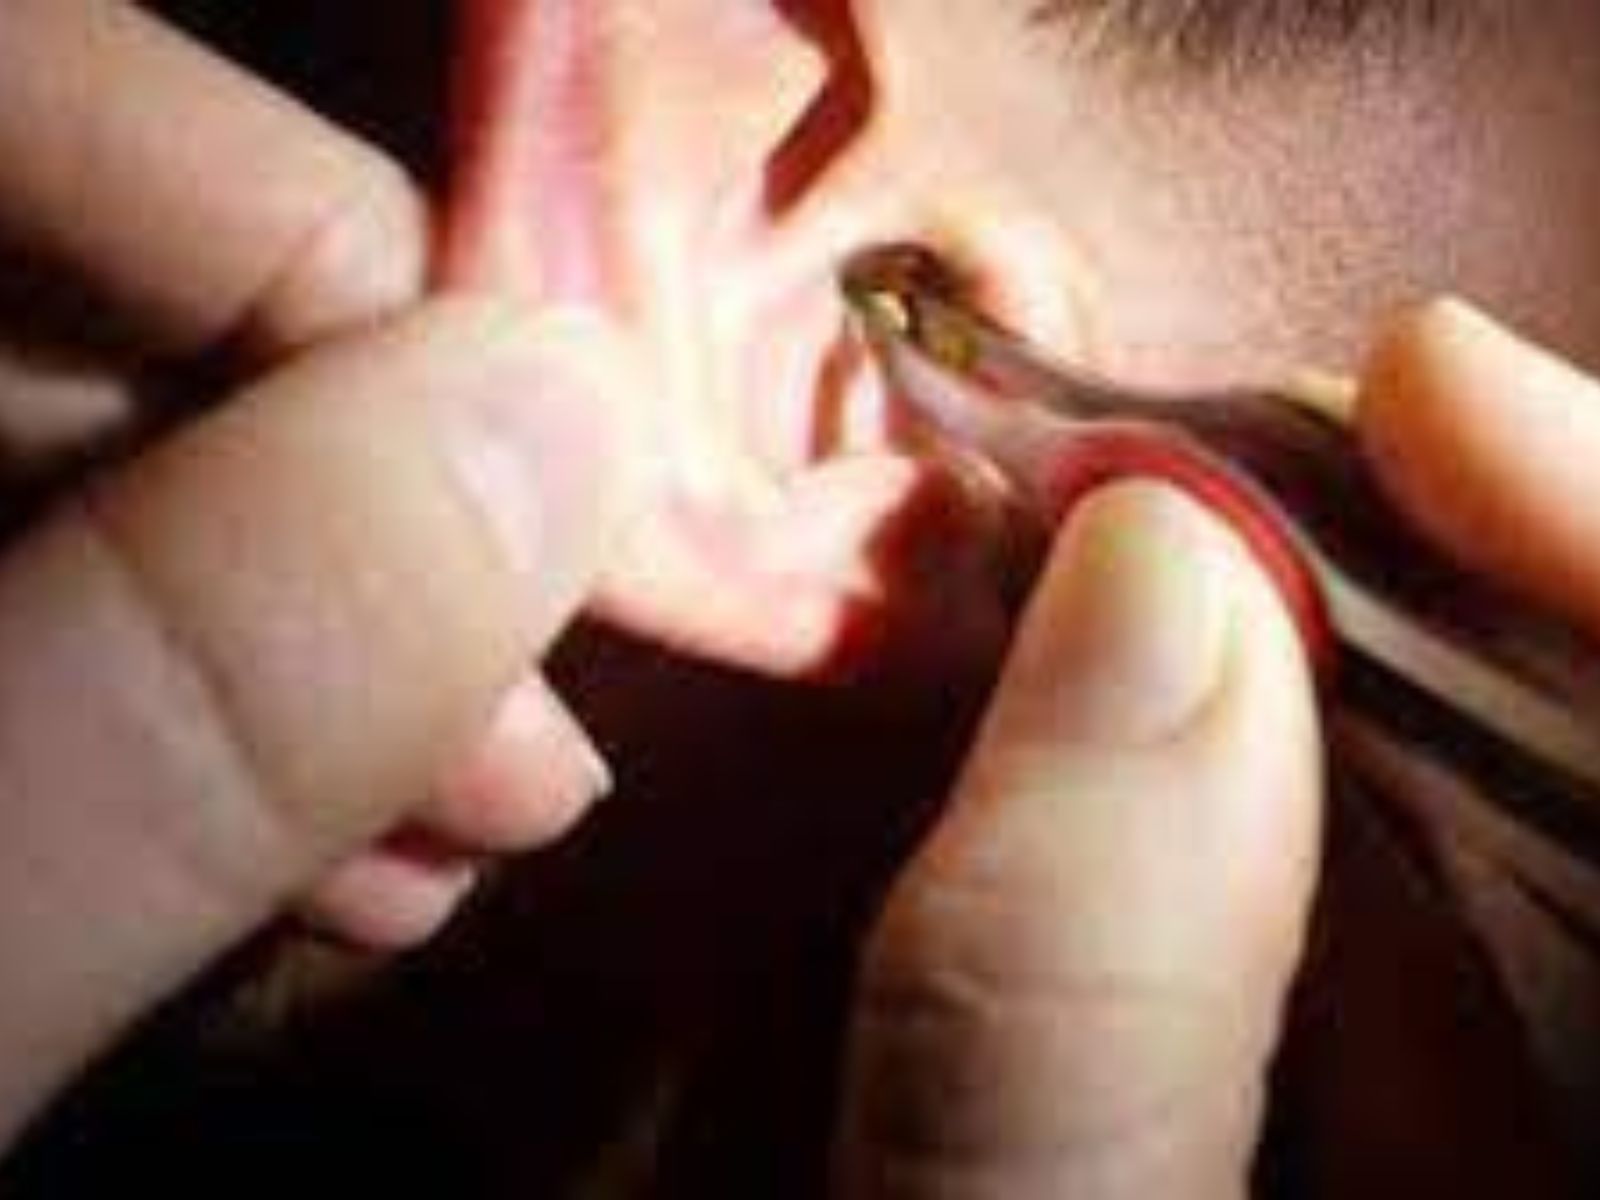 Manual Ear Wax removal for patient from Bestwood